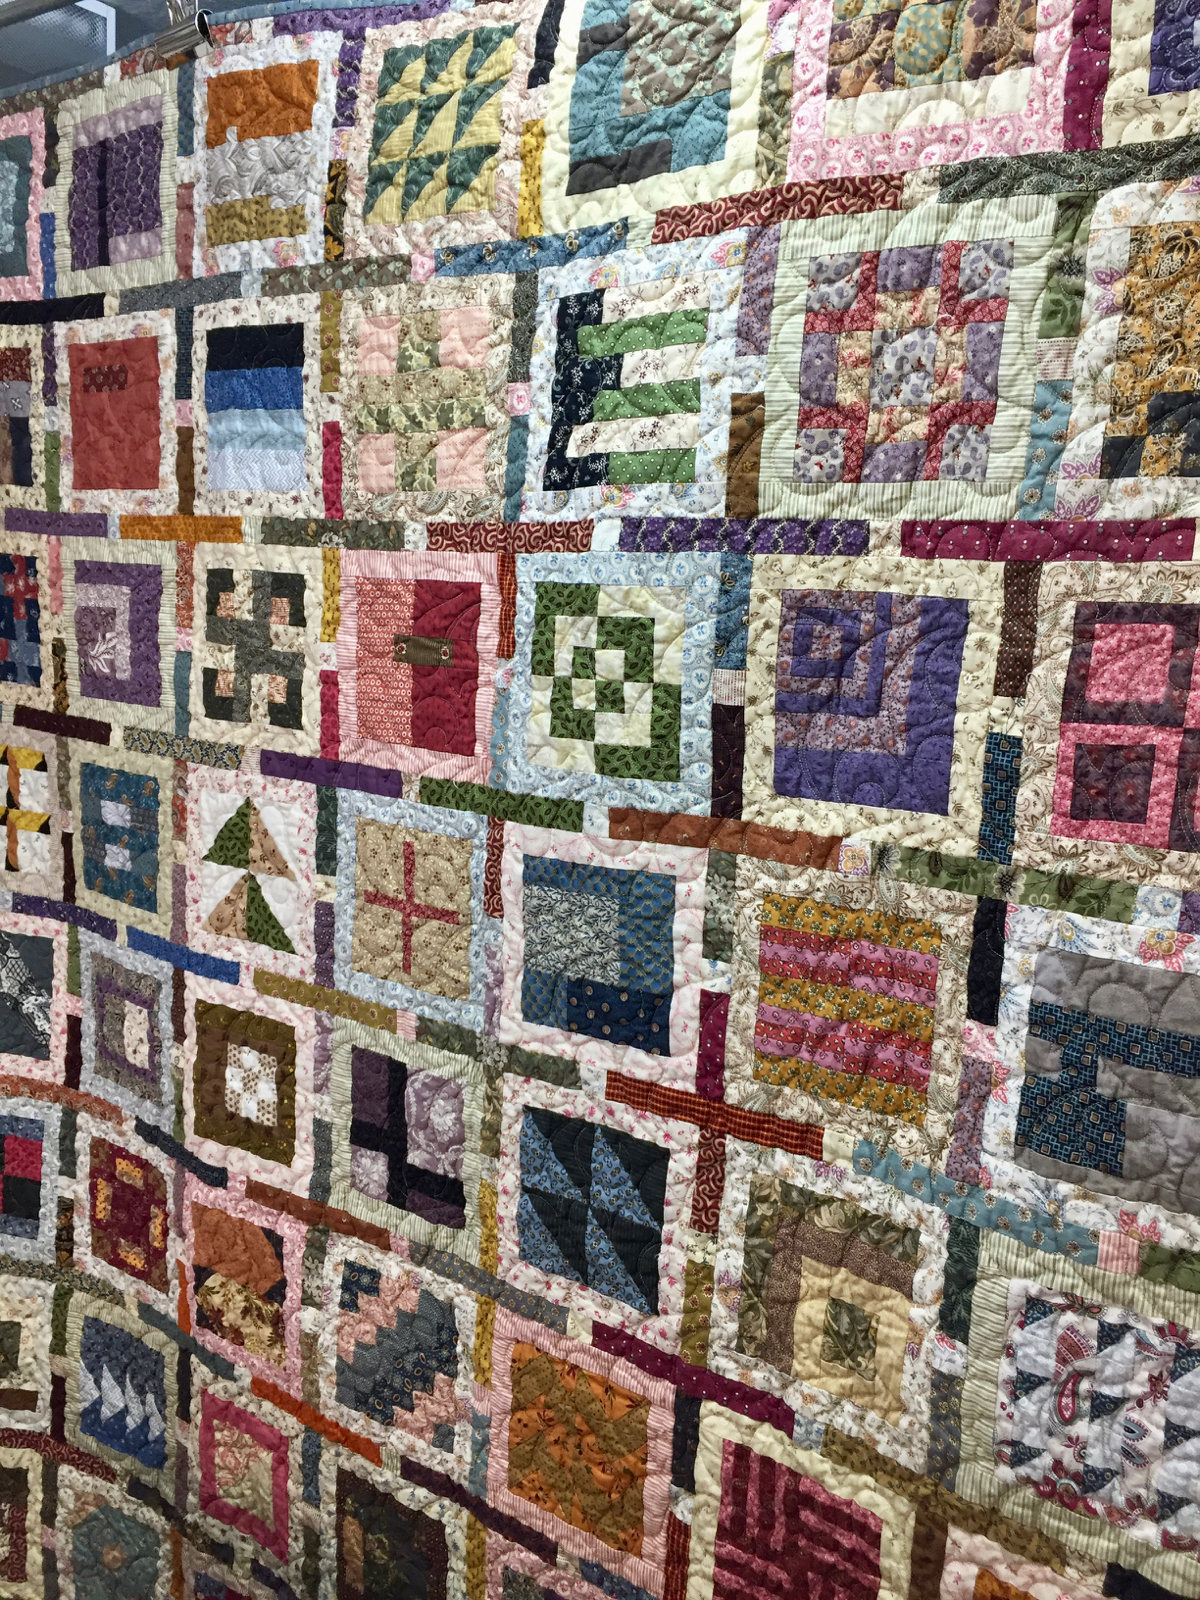 Books — Chatterbox Quilts' Blog - Chatterbox Quilts